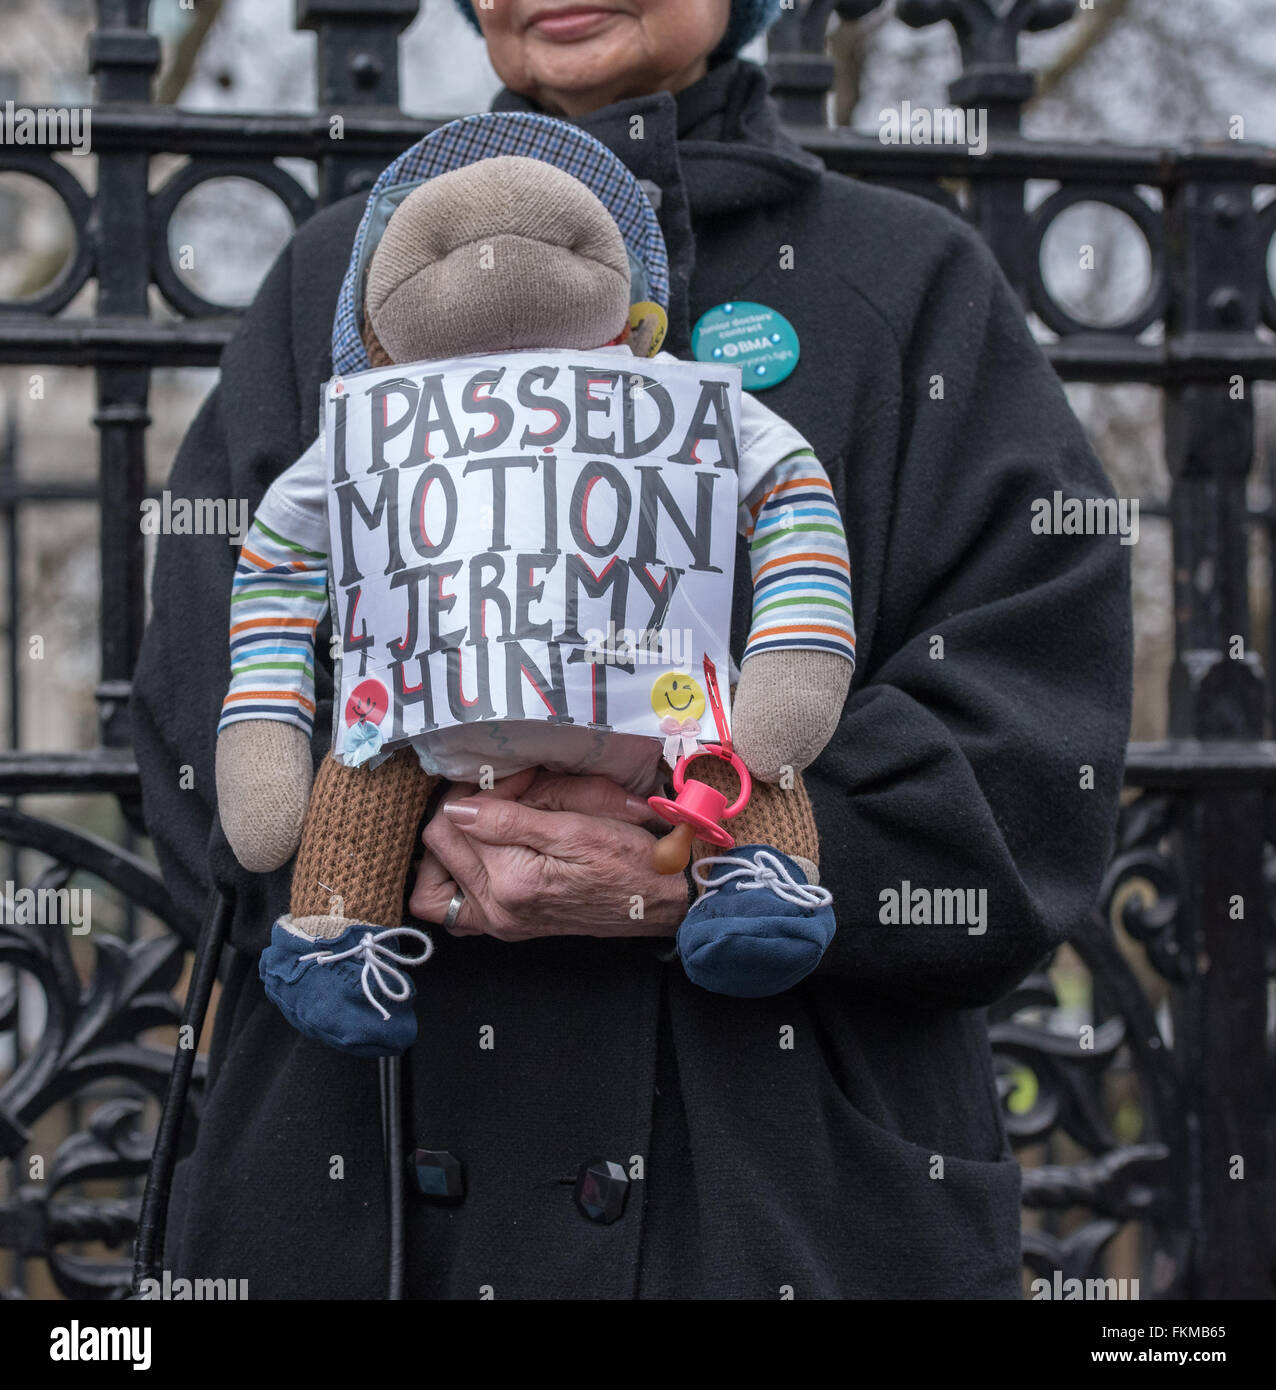 london 9th March 2016, NHS Junior Doctors picket, St Thomas Hospital, Westminster, teddy bear passes a motion Credit:  Ian Davidson/Alamy Live News Stock Photo